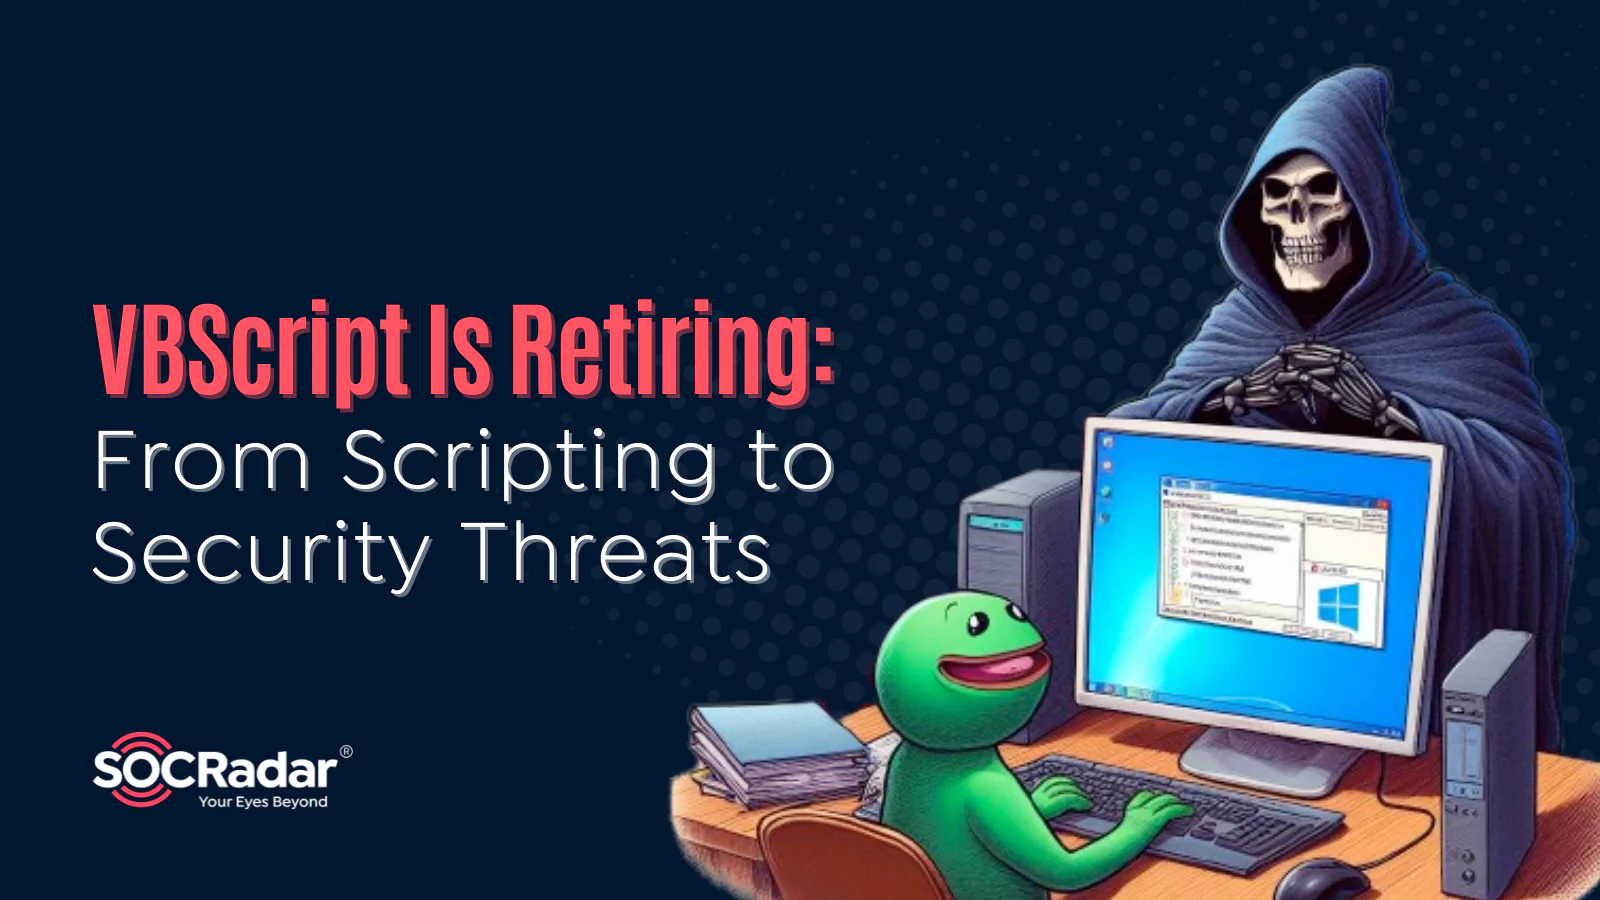 SOCRadar® Cyber Intelligence Inc. | VBScript Is Retiring: From Scripting to Security Threats